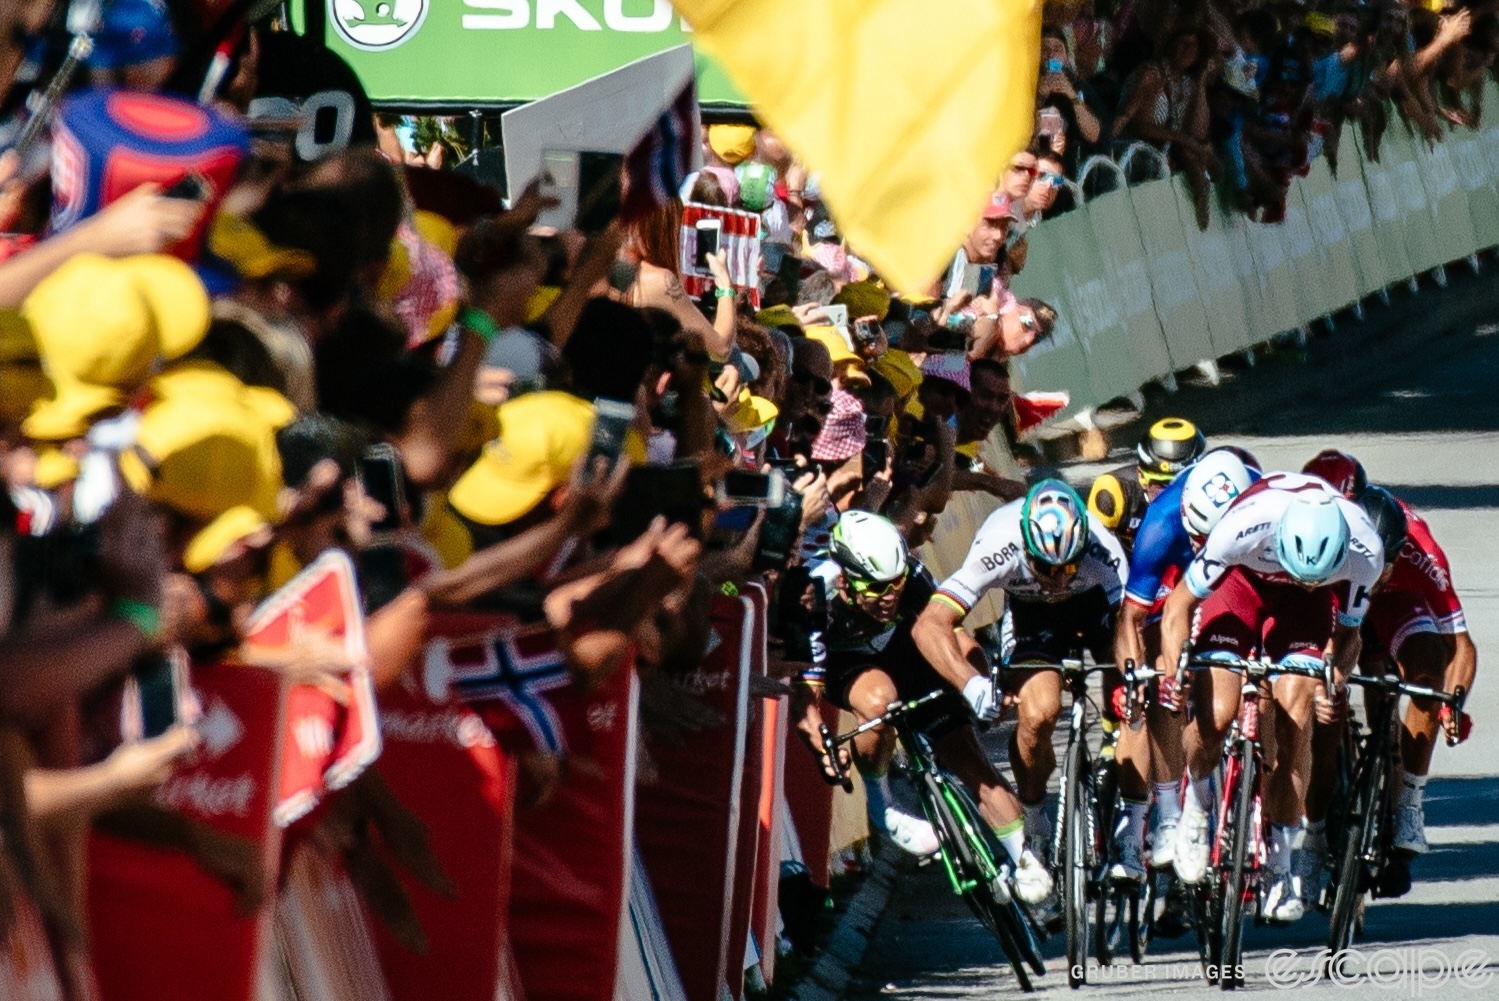 Riders accelerate for a sprint on stage 4 of the 2017 Tour de France. Their heads are down, and Peter Sagan's right elbow juts out as he makes contact with Mark Cavendish. Cavendish is squeezed against the barriers and is falling but has not yet hit the ground.